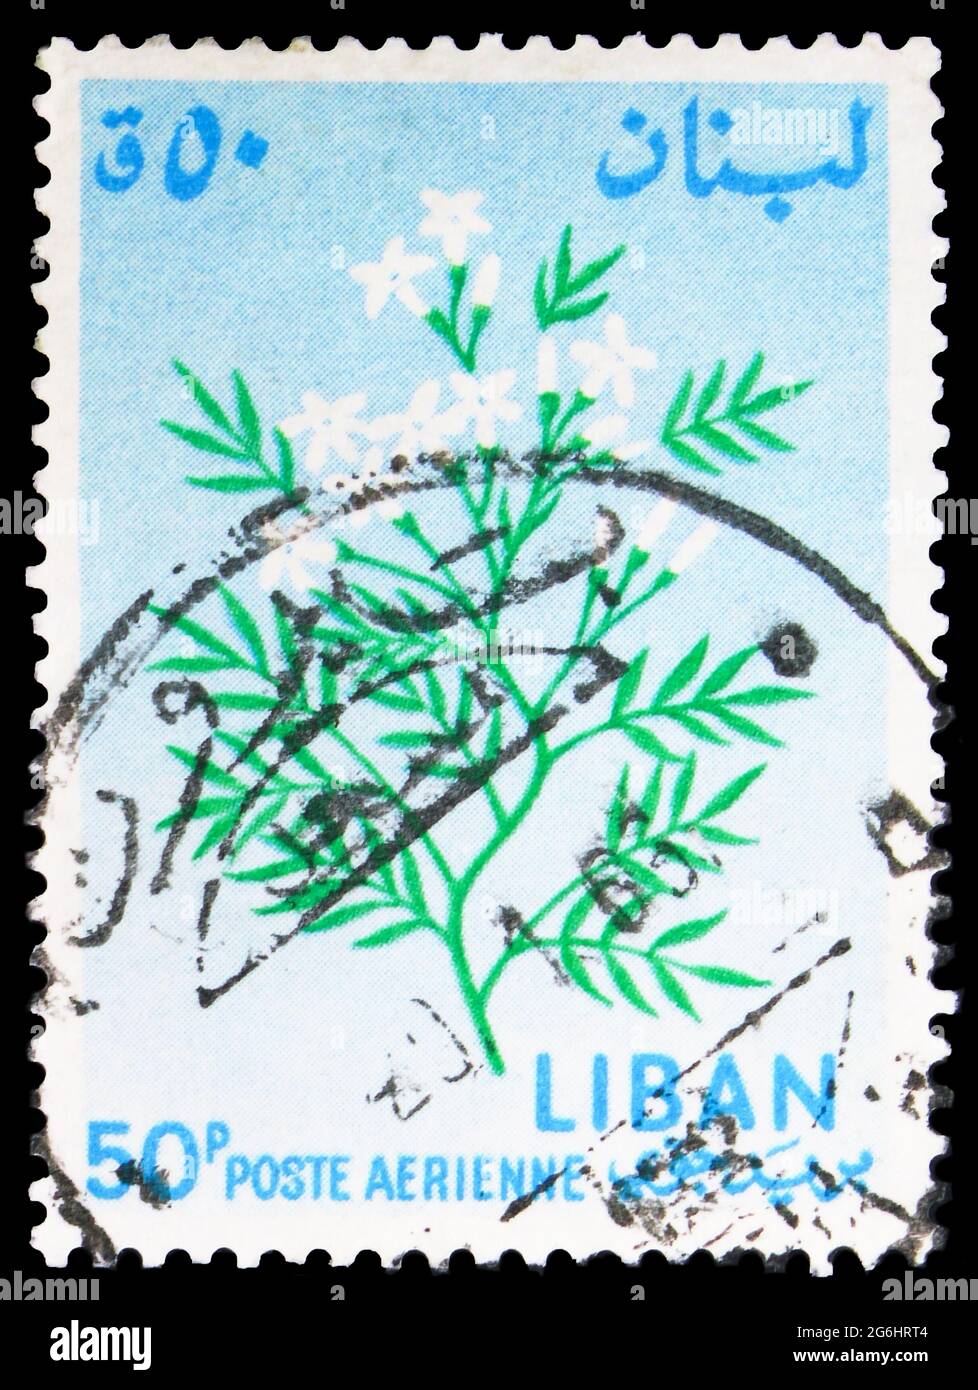 MOSCOW, RUSSIA - APRIL 28, 2020: Postage stamp printed in Lebanon shows Jasminum sp., Flowers serie, circa 1964 Stock Photo